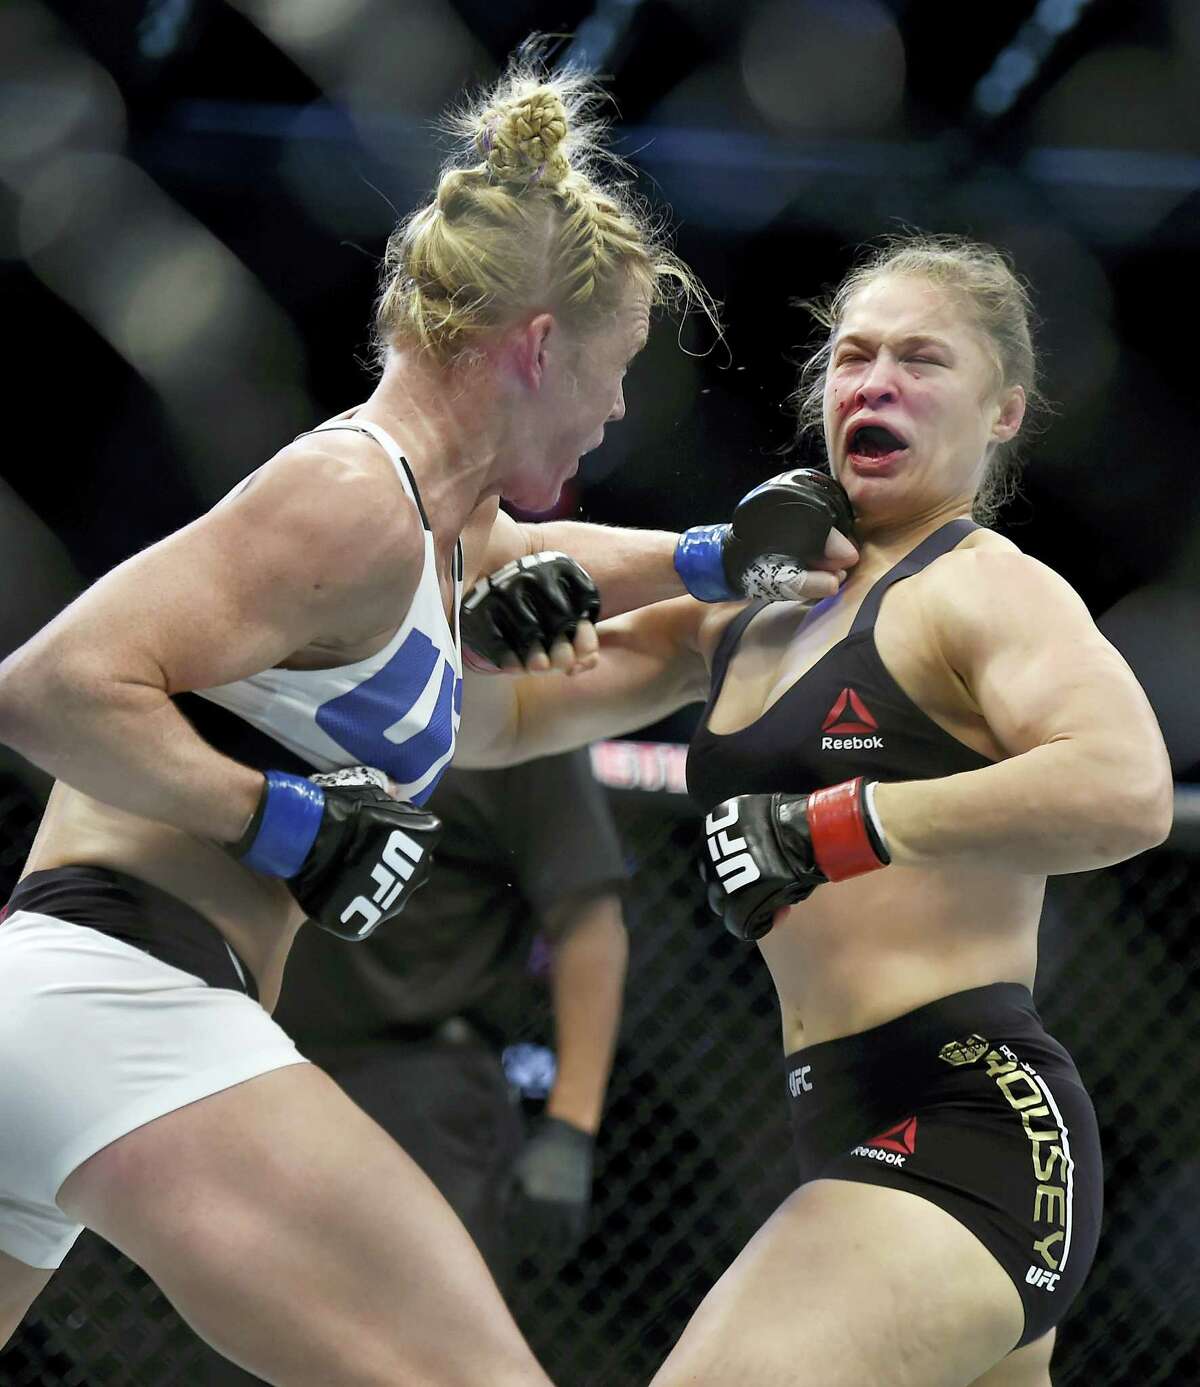 Holly Holm, left, punches Ronda Rousey during their UFC 193 bantamweight title fight in Melbourne, Australia.